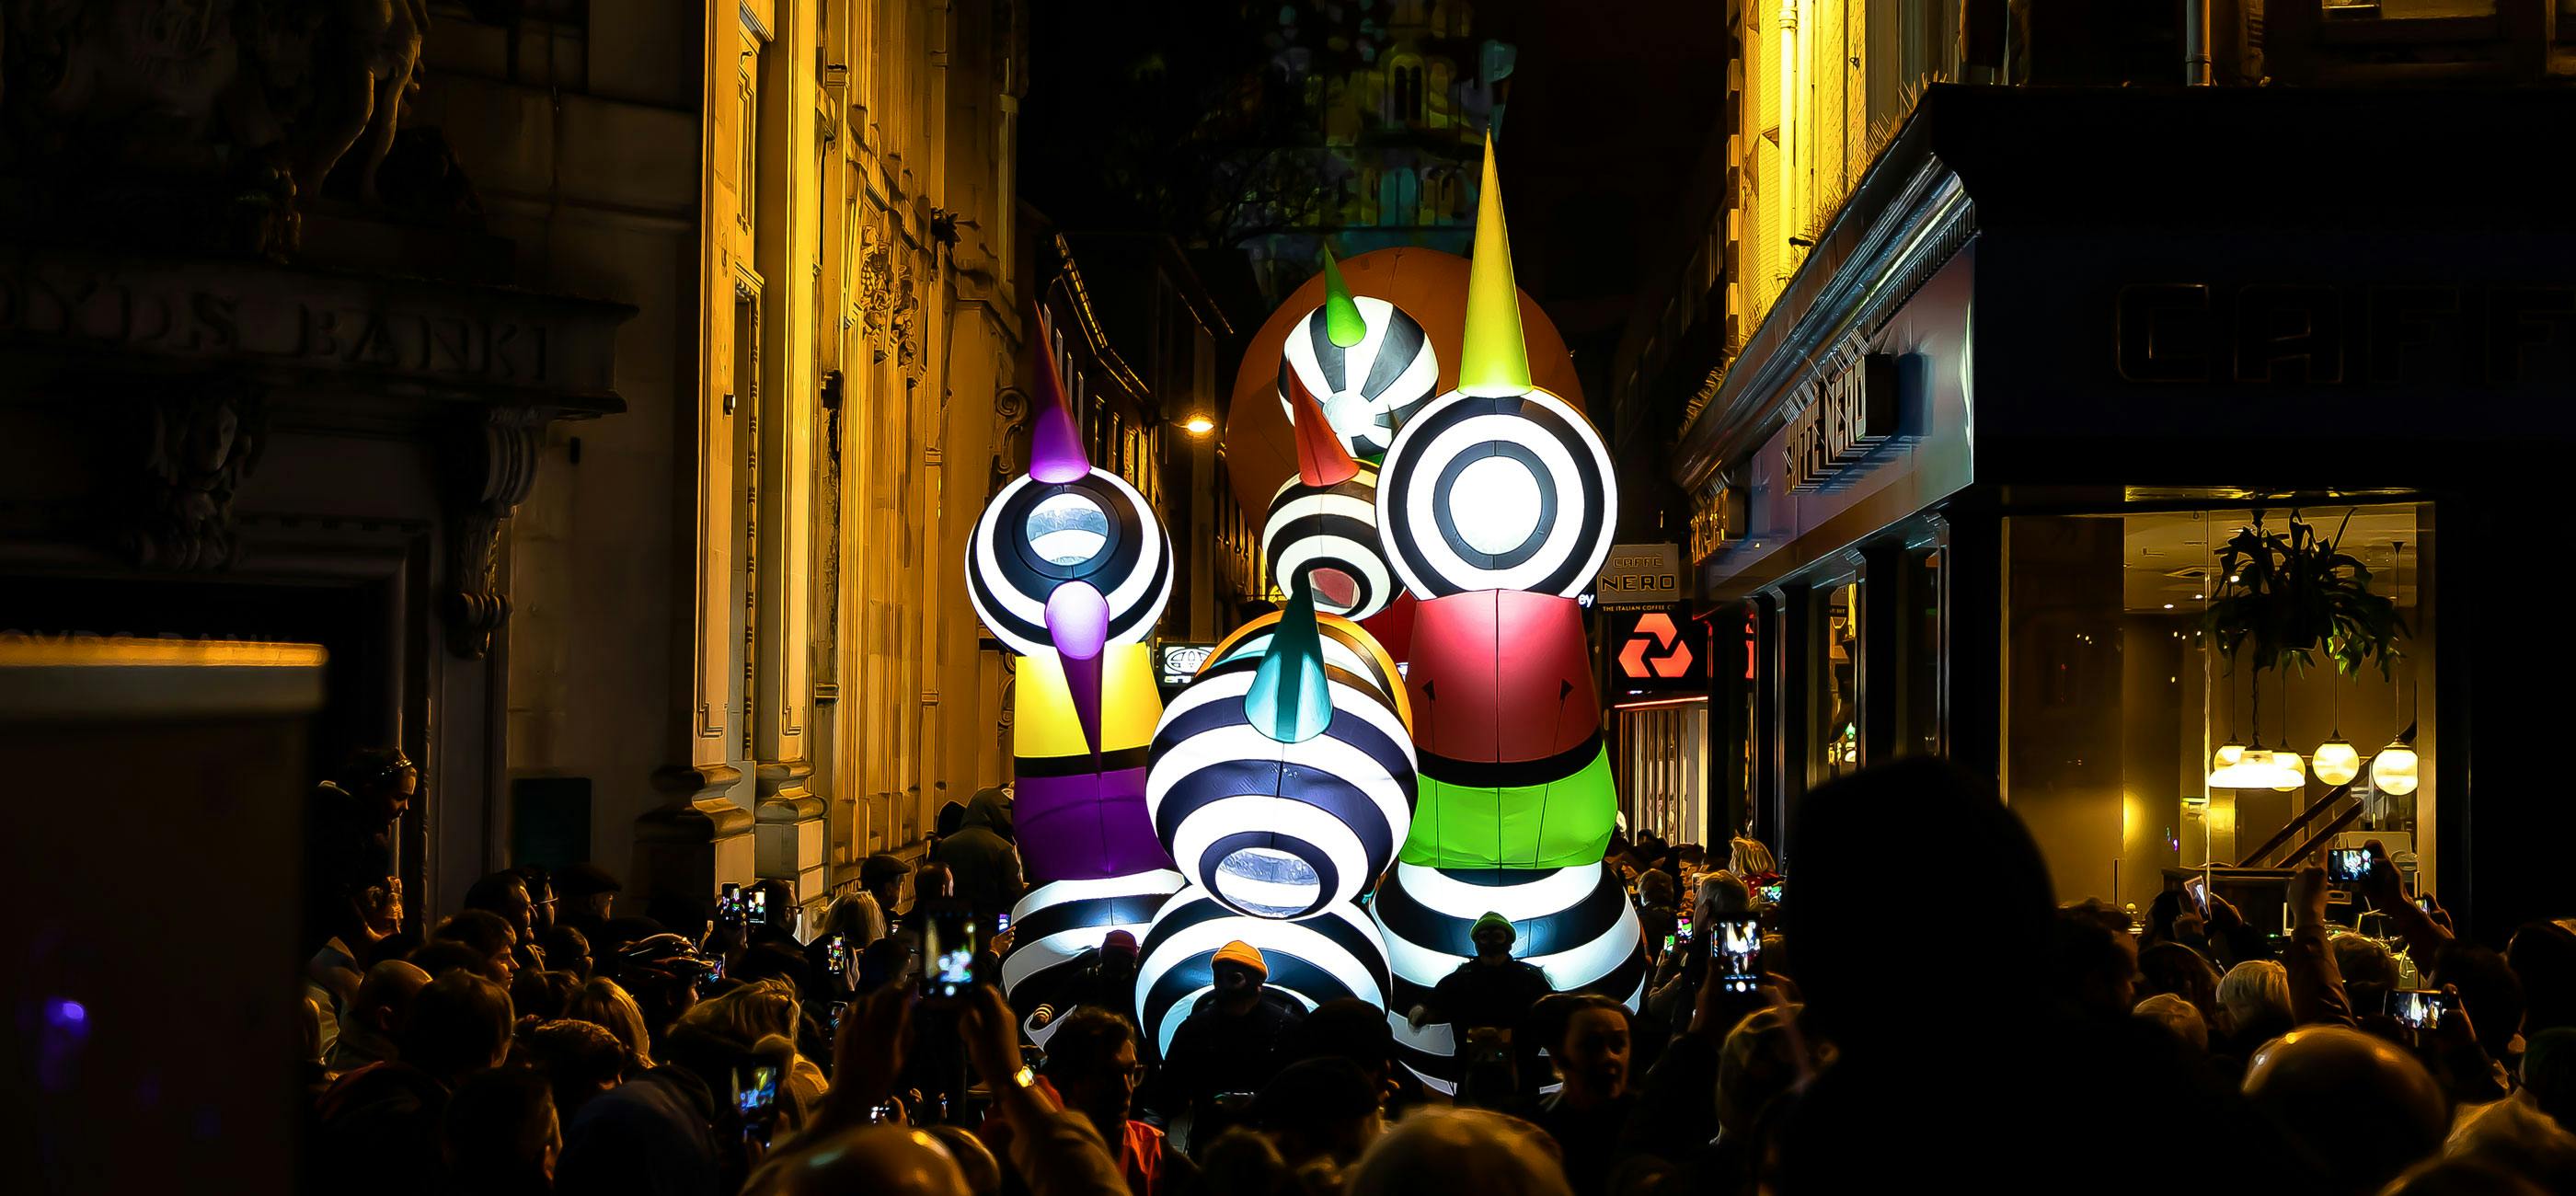 A colourful light-up inflatable parades through the streets of Norwich at night surrounded by a crowd.